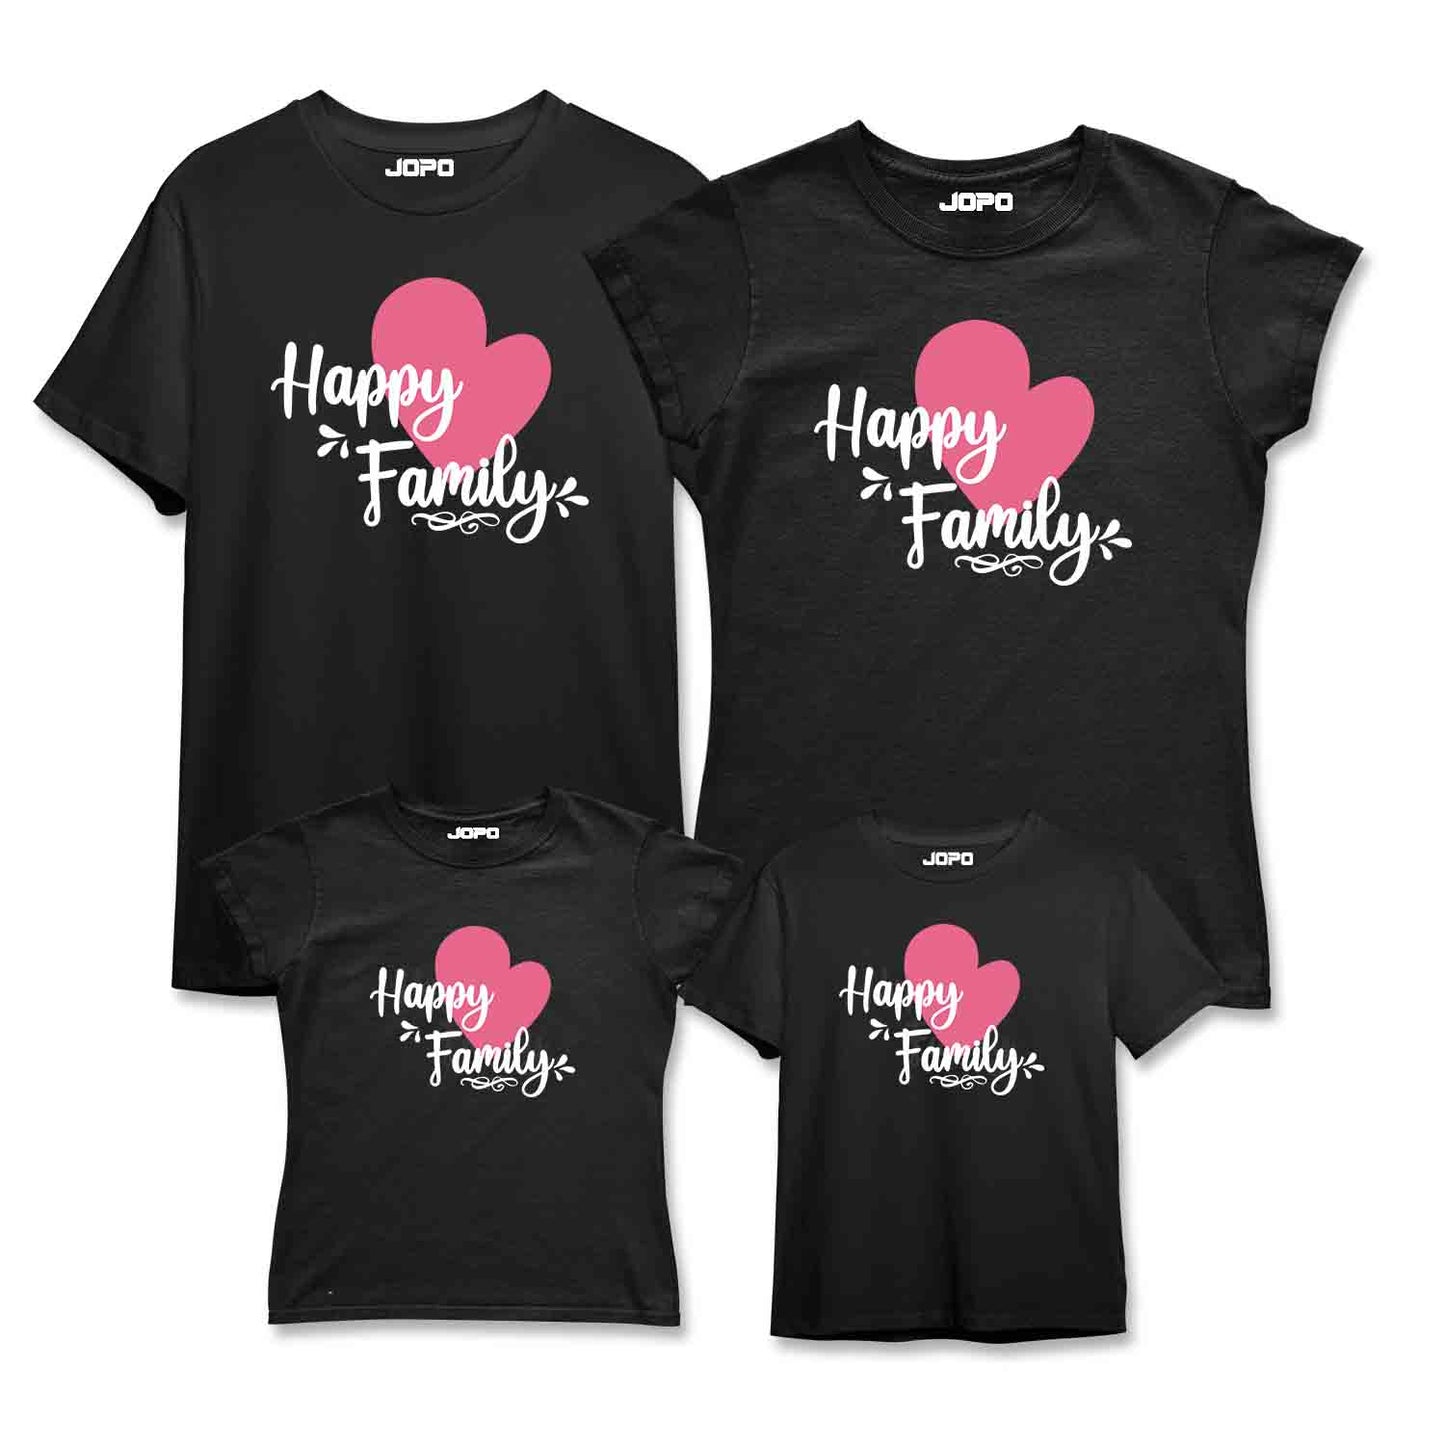 Happy Matching Family T-Shirts Set of 3 and 4 for Mom, Dad, Daughter & Son